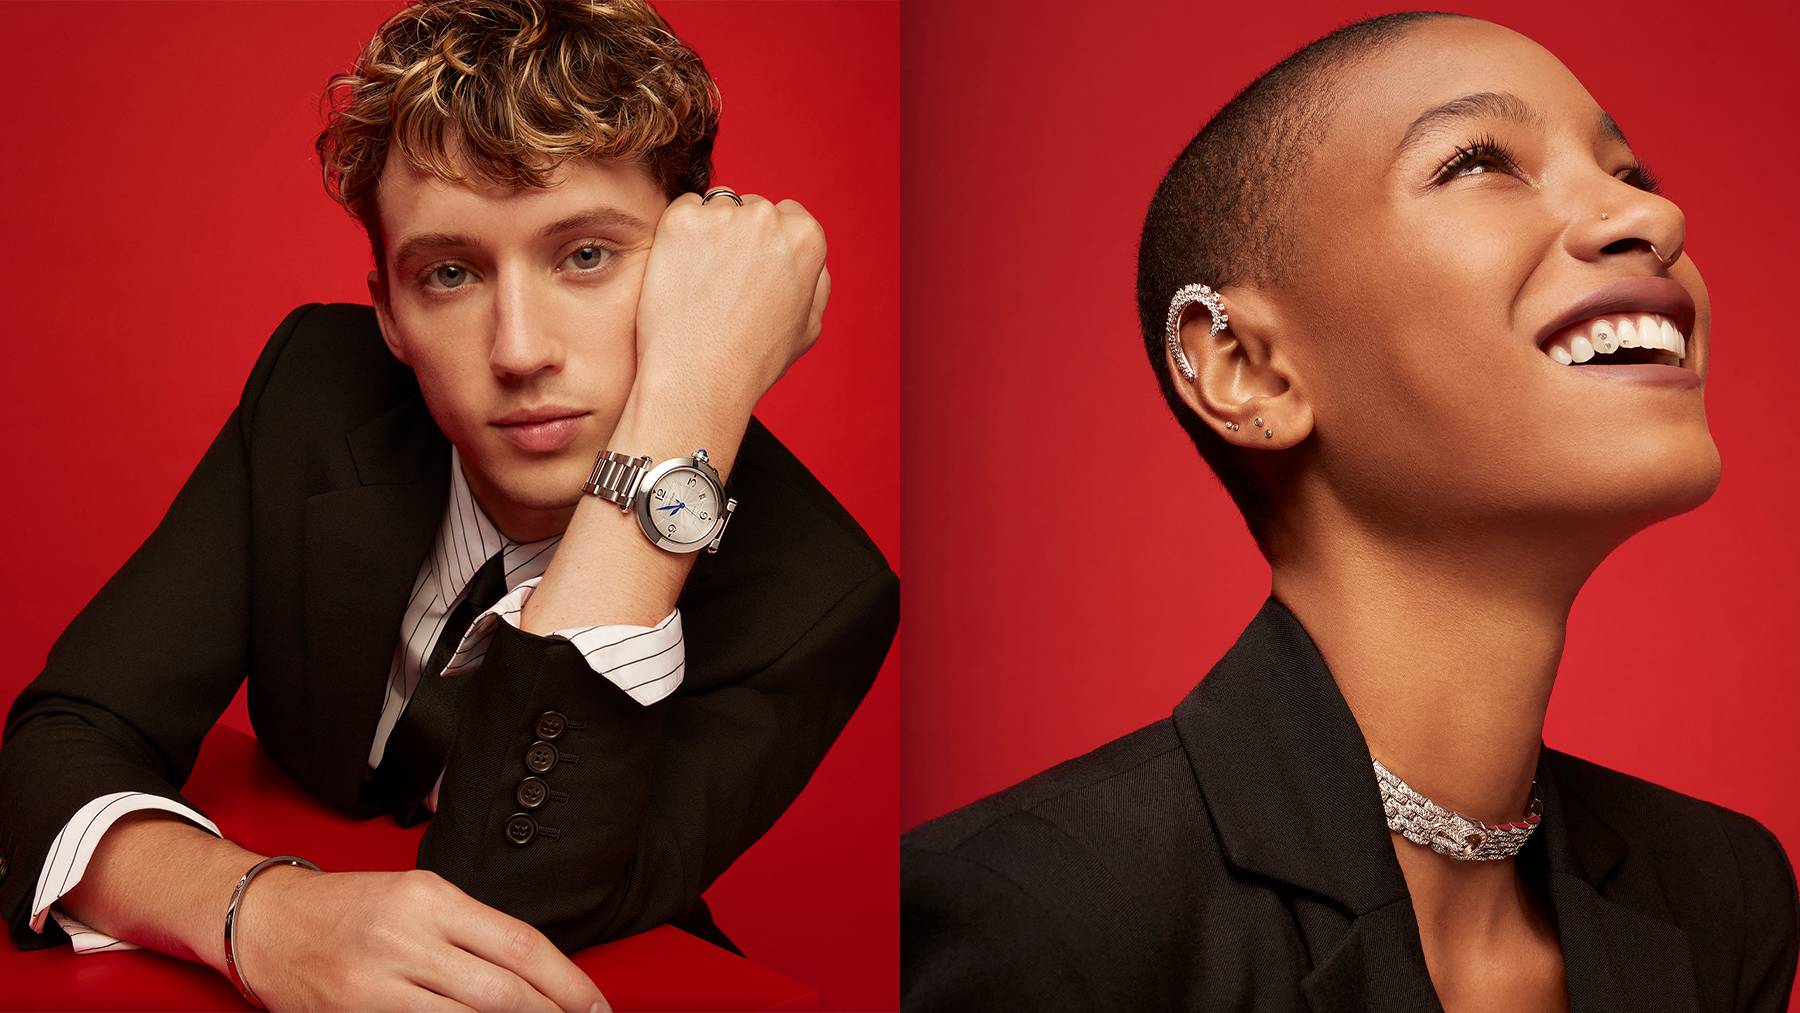 Singers Troye Sivian and Willow Smith are featured in Cartier's "Love is All" campaign. Cartier.